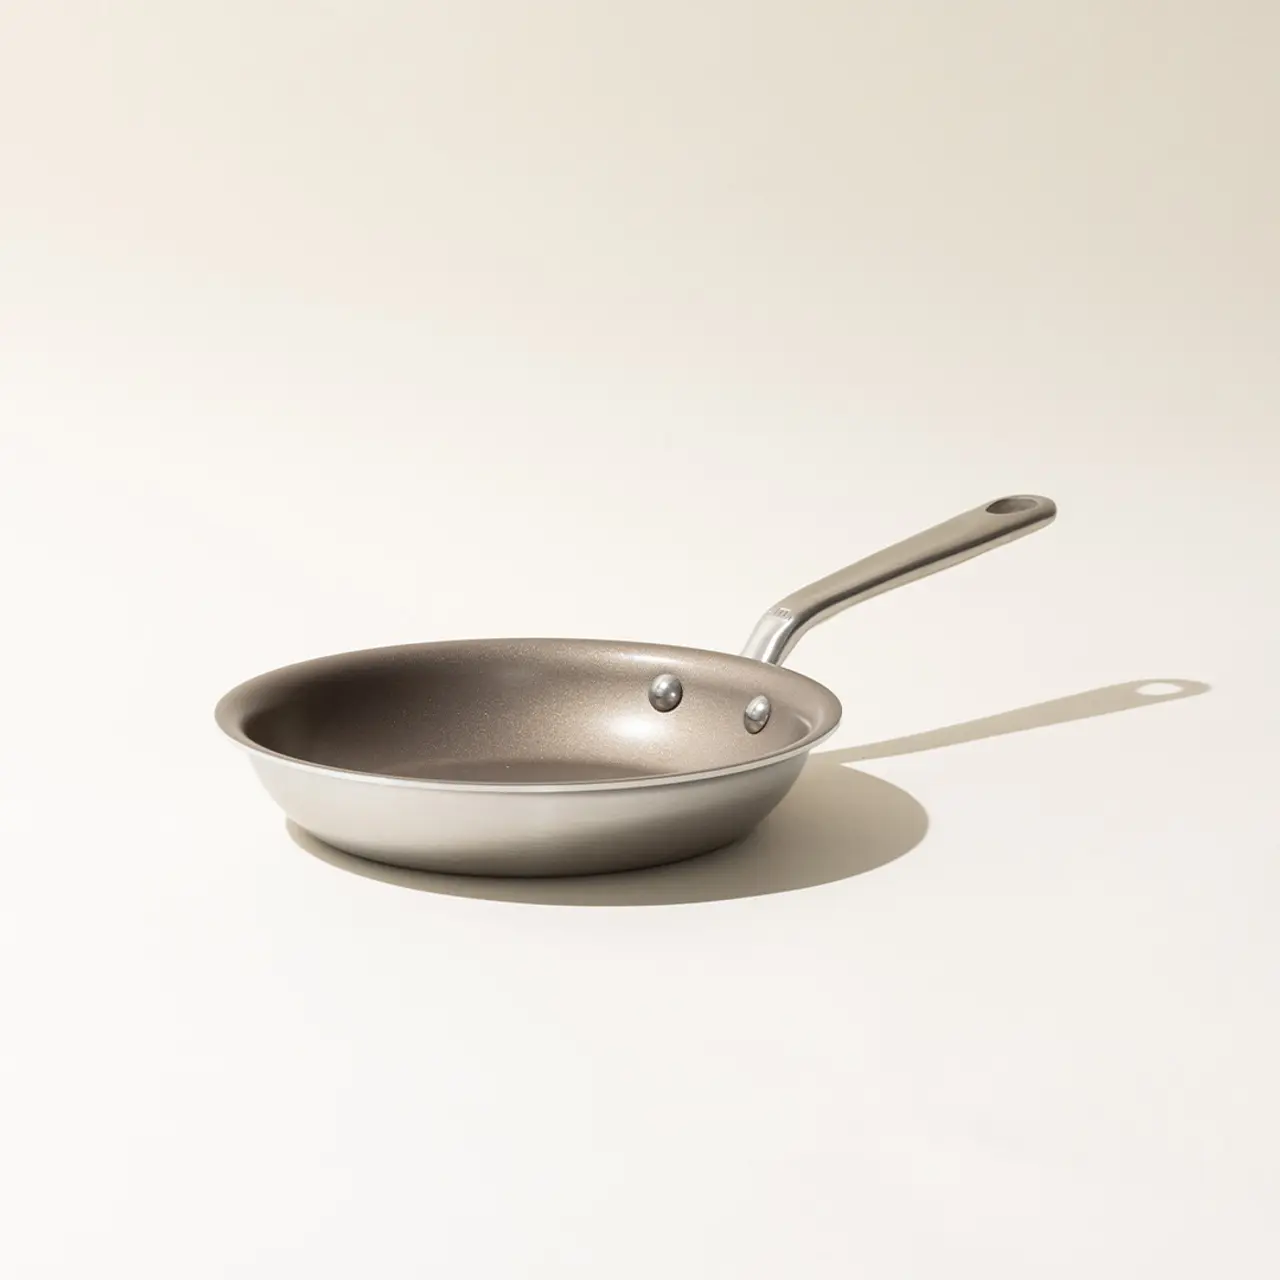 A single stainless steel frying pan on a neutral background with a shadow indicating studio lighting.